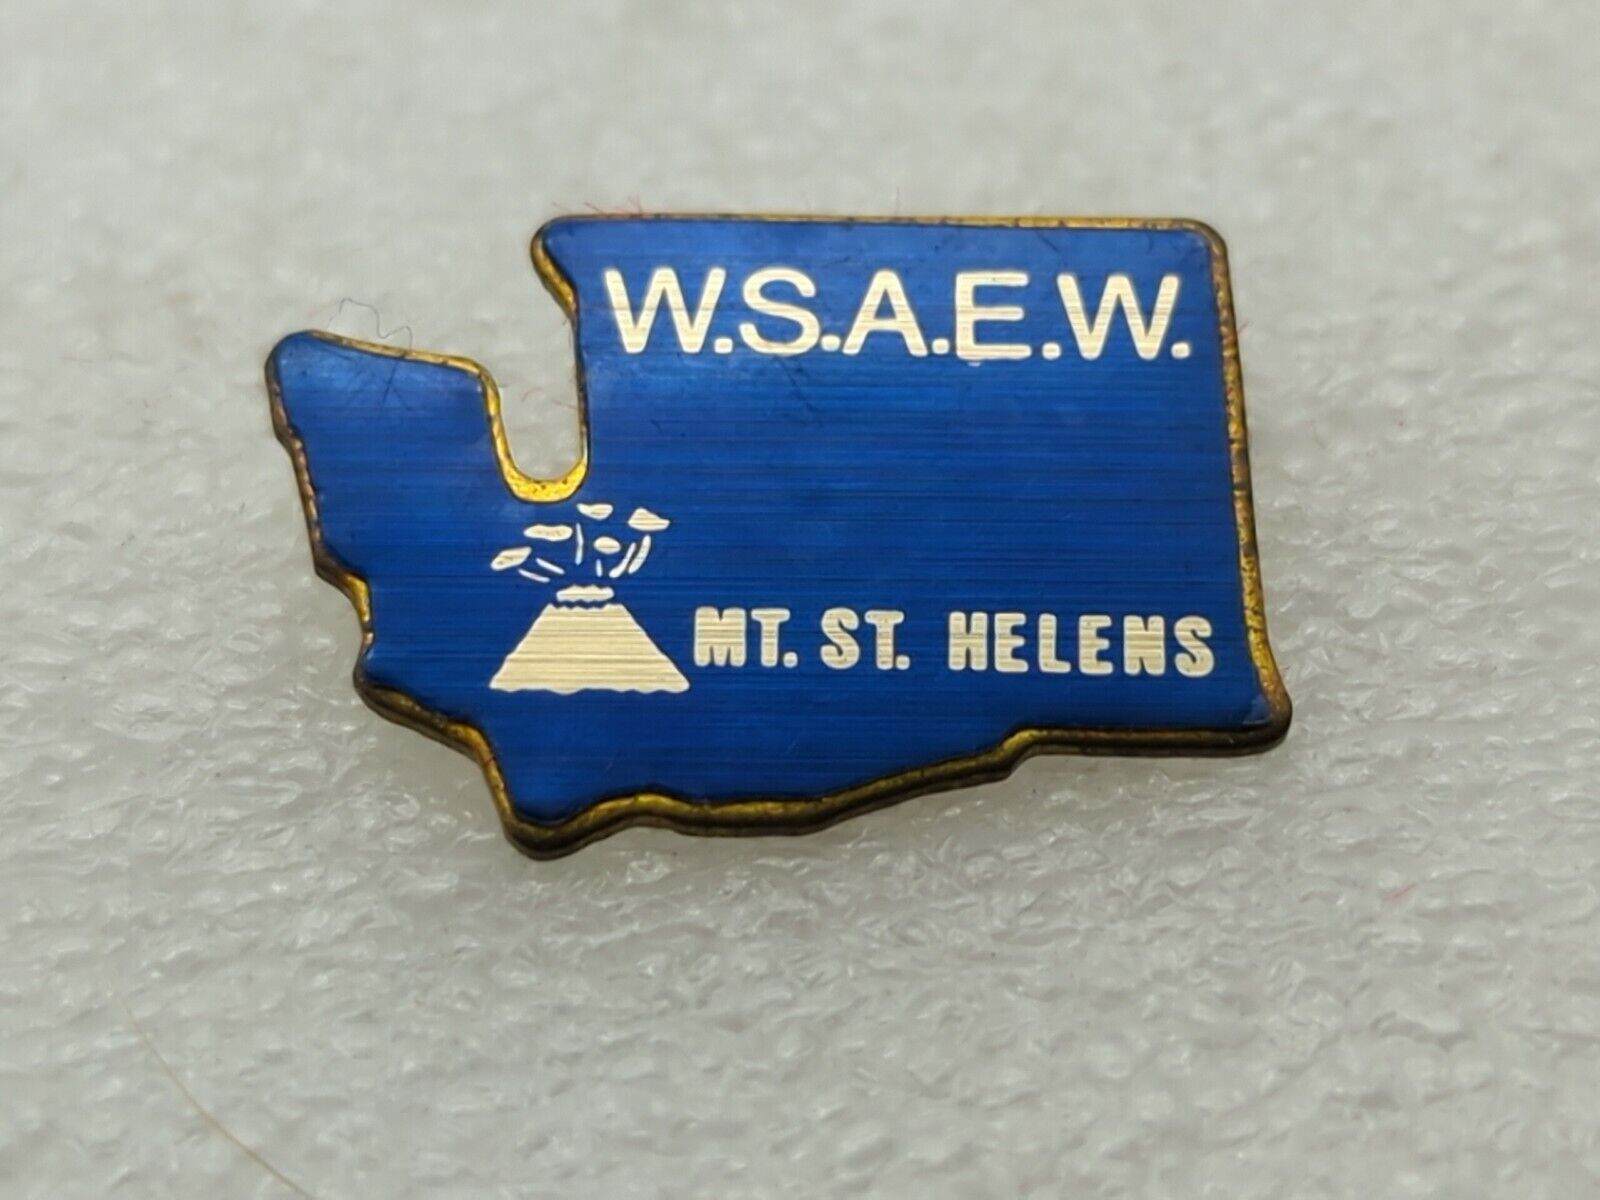 VINTAGE LOCAL UNION MADE LAPEL PIN UNION W.S.A.E.W. MT. ST HELENS